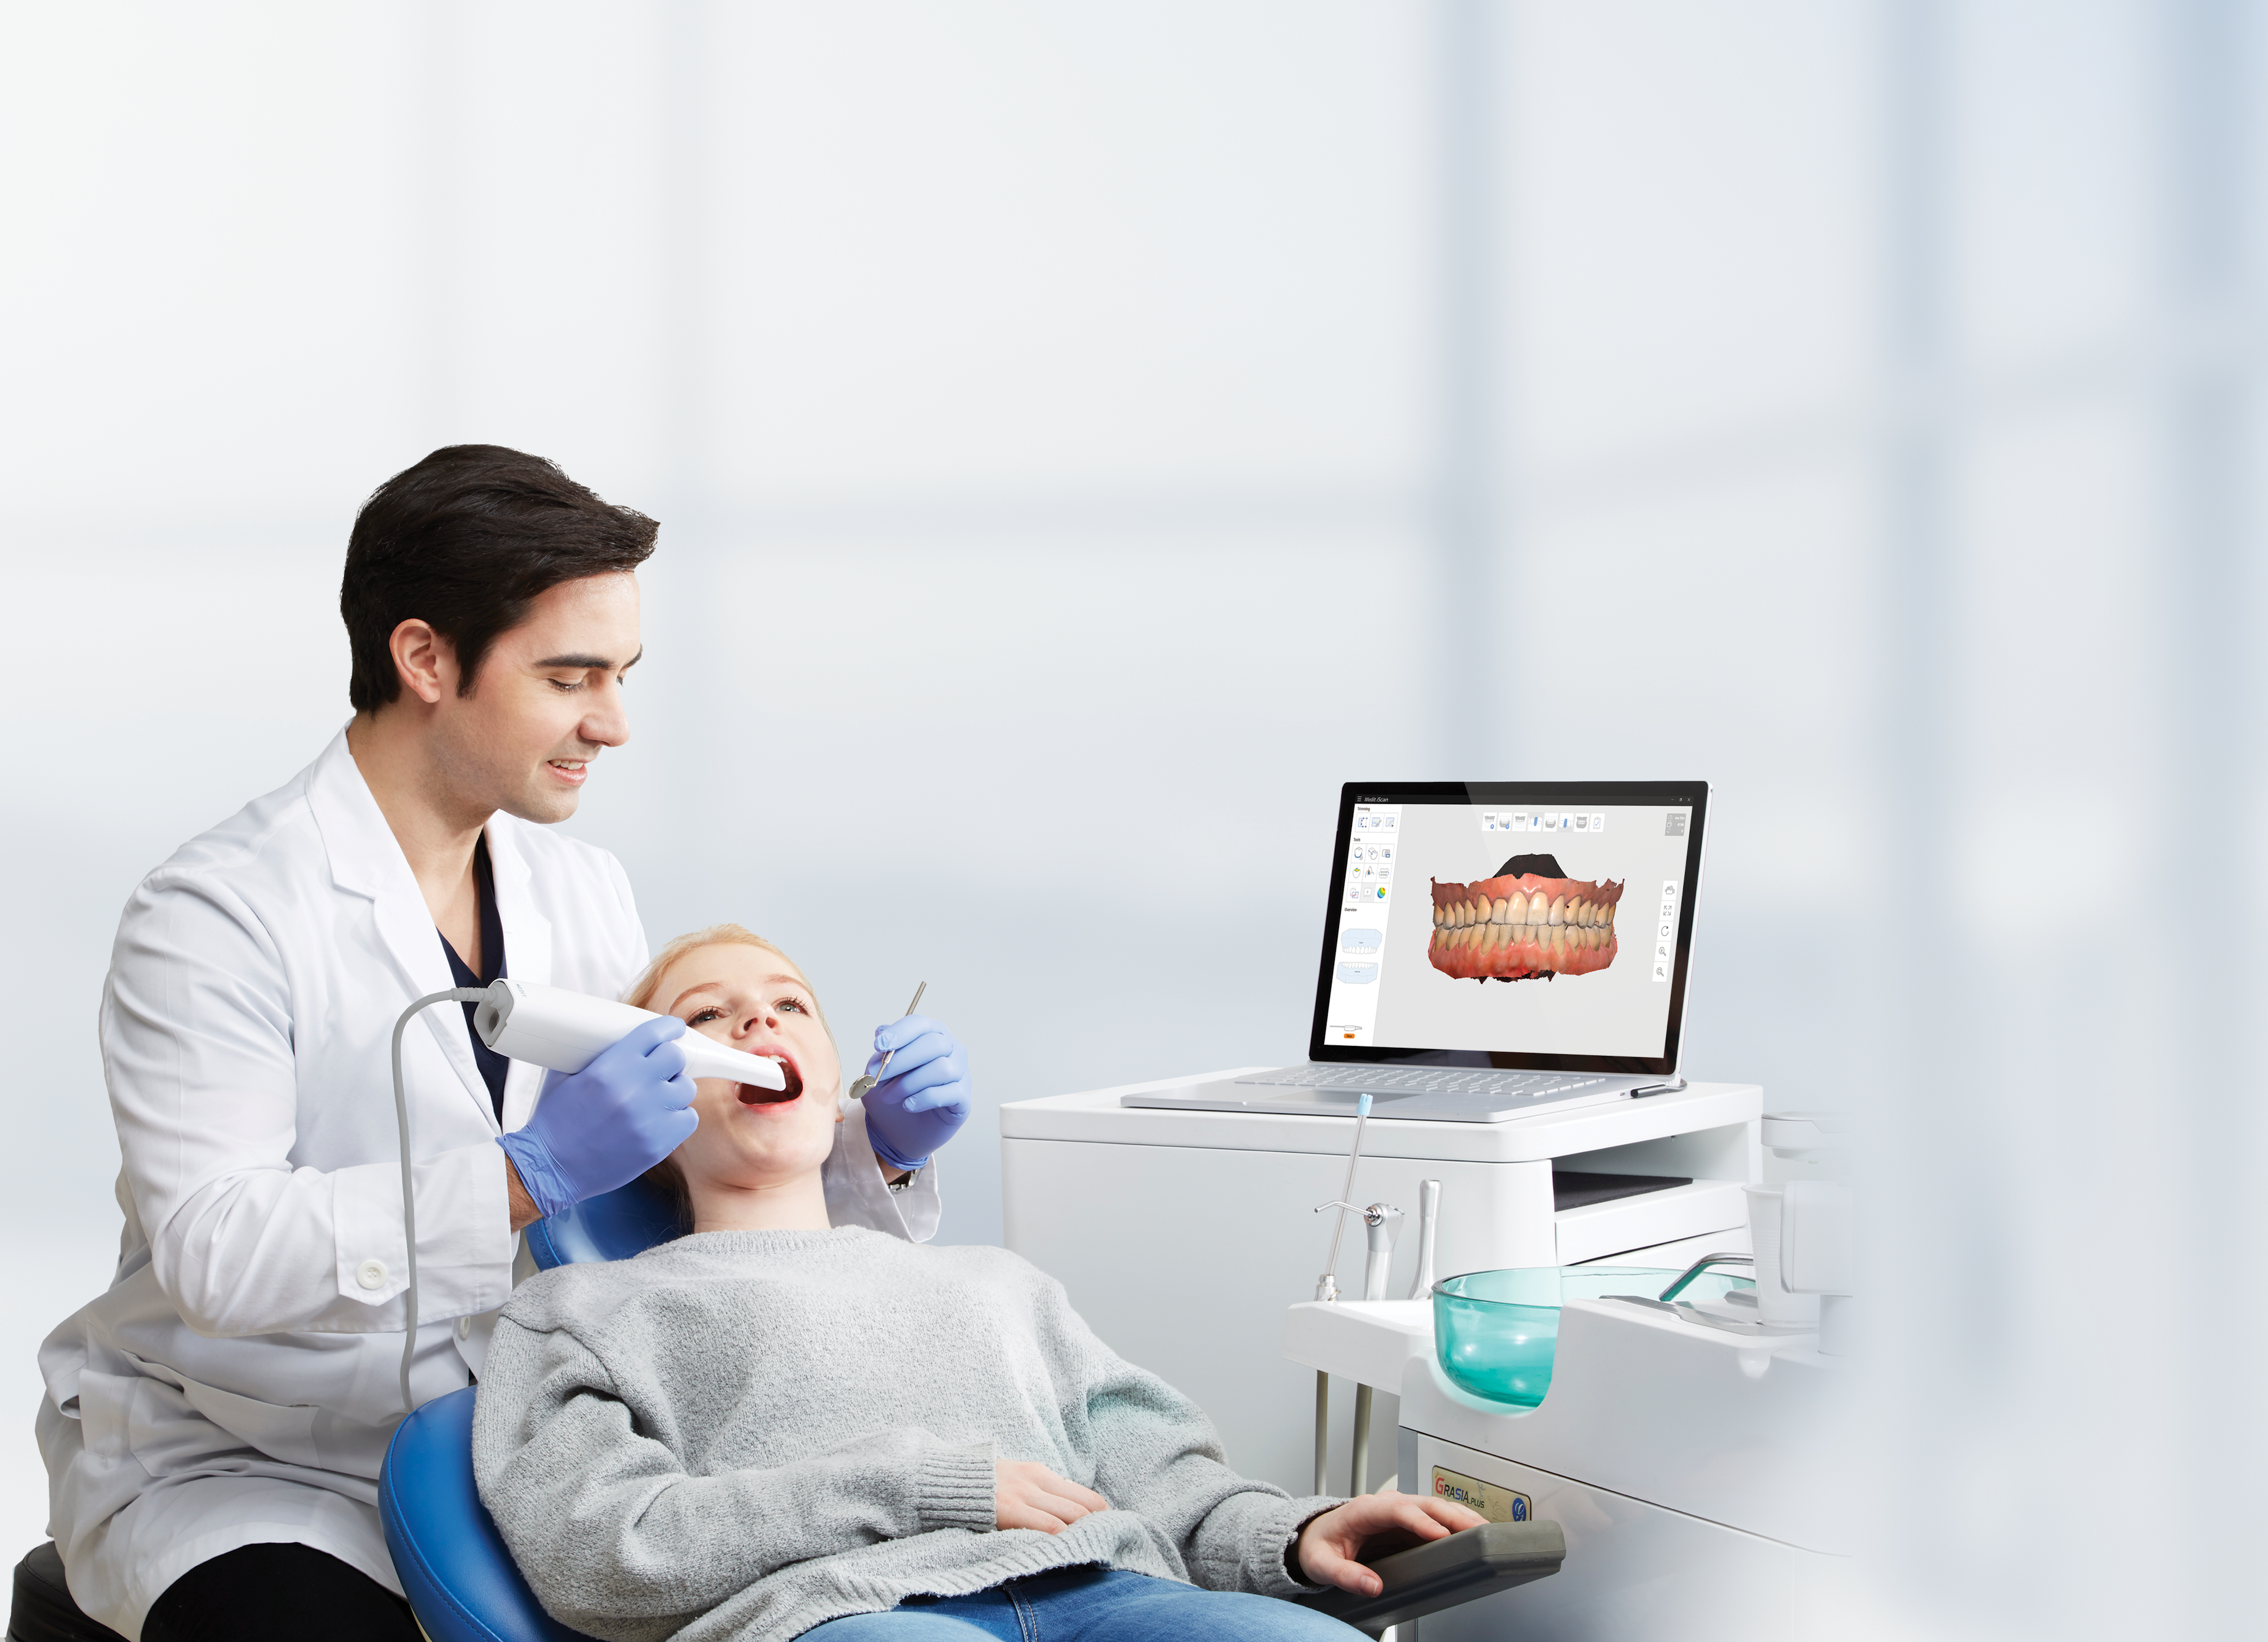 A clinician scans a patient’s teeth using the Medit i500 intraoral scanner.